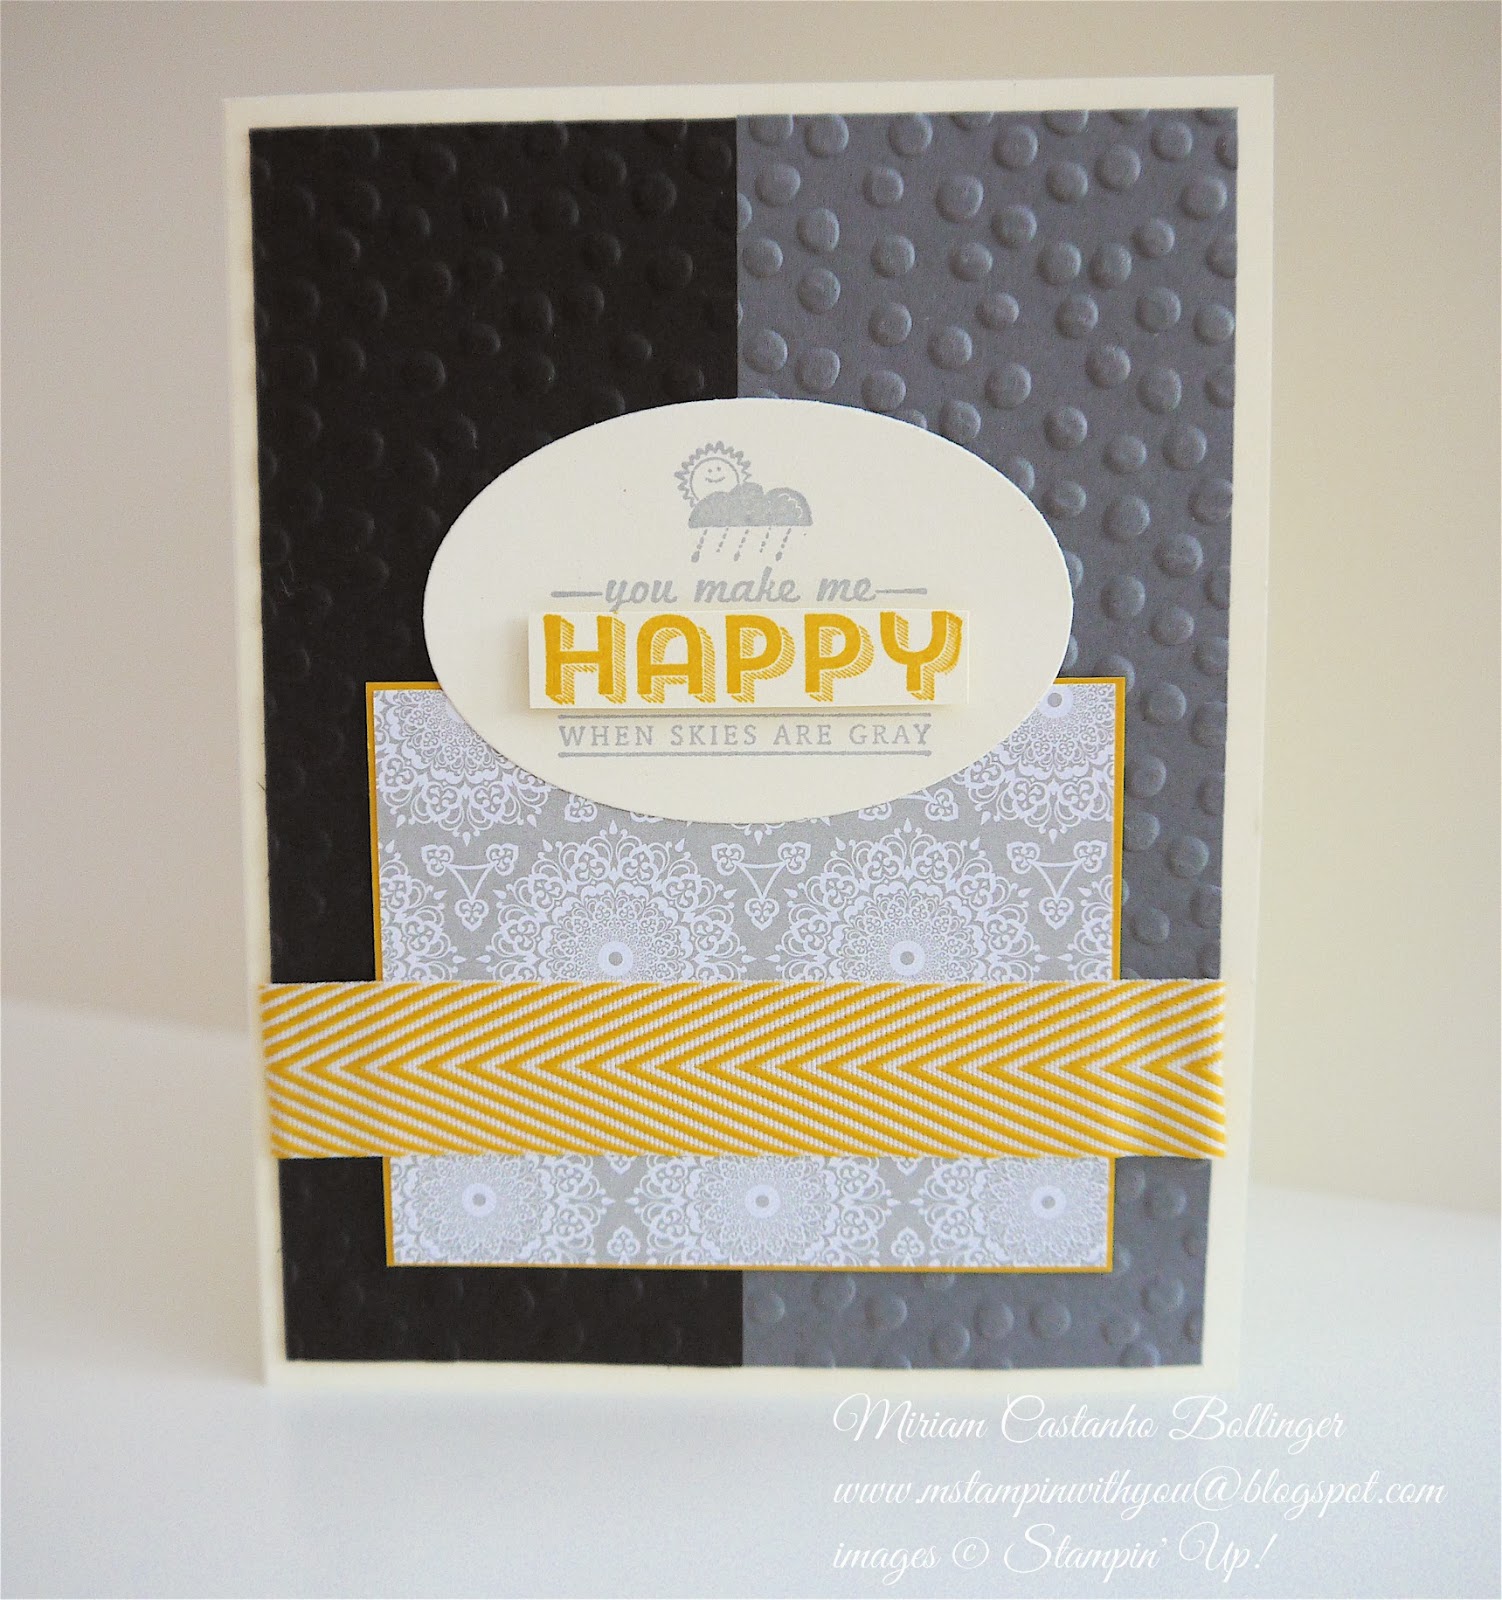 M Stampin' with you: January 2014